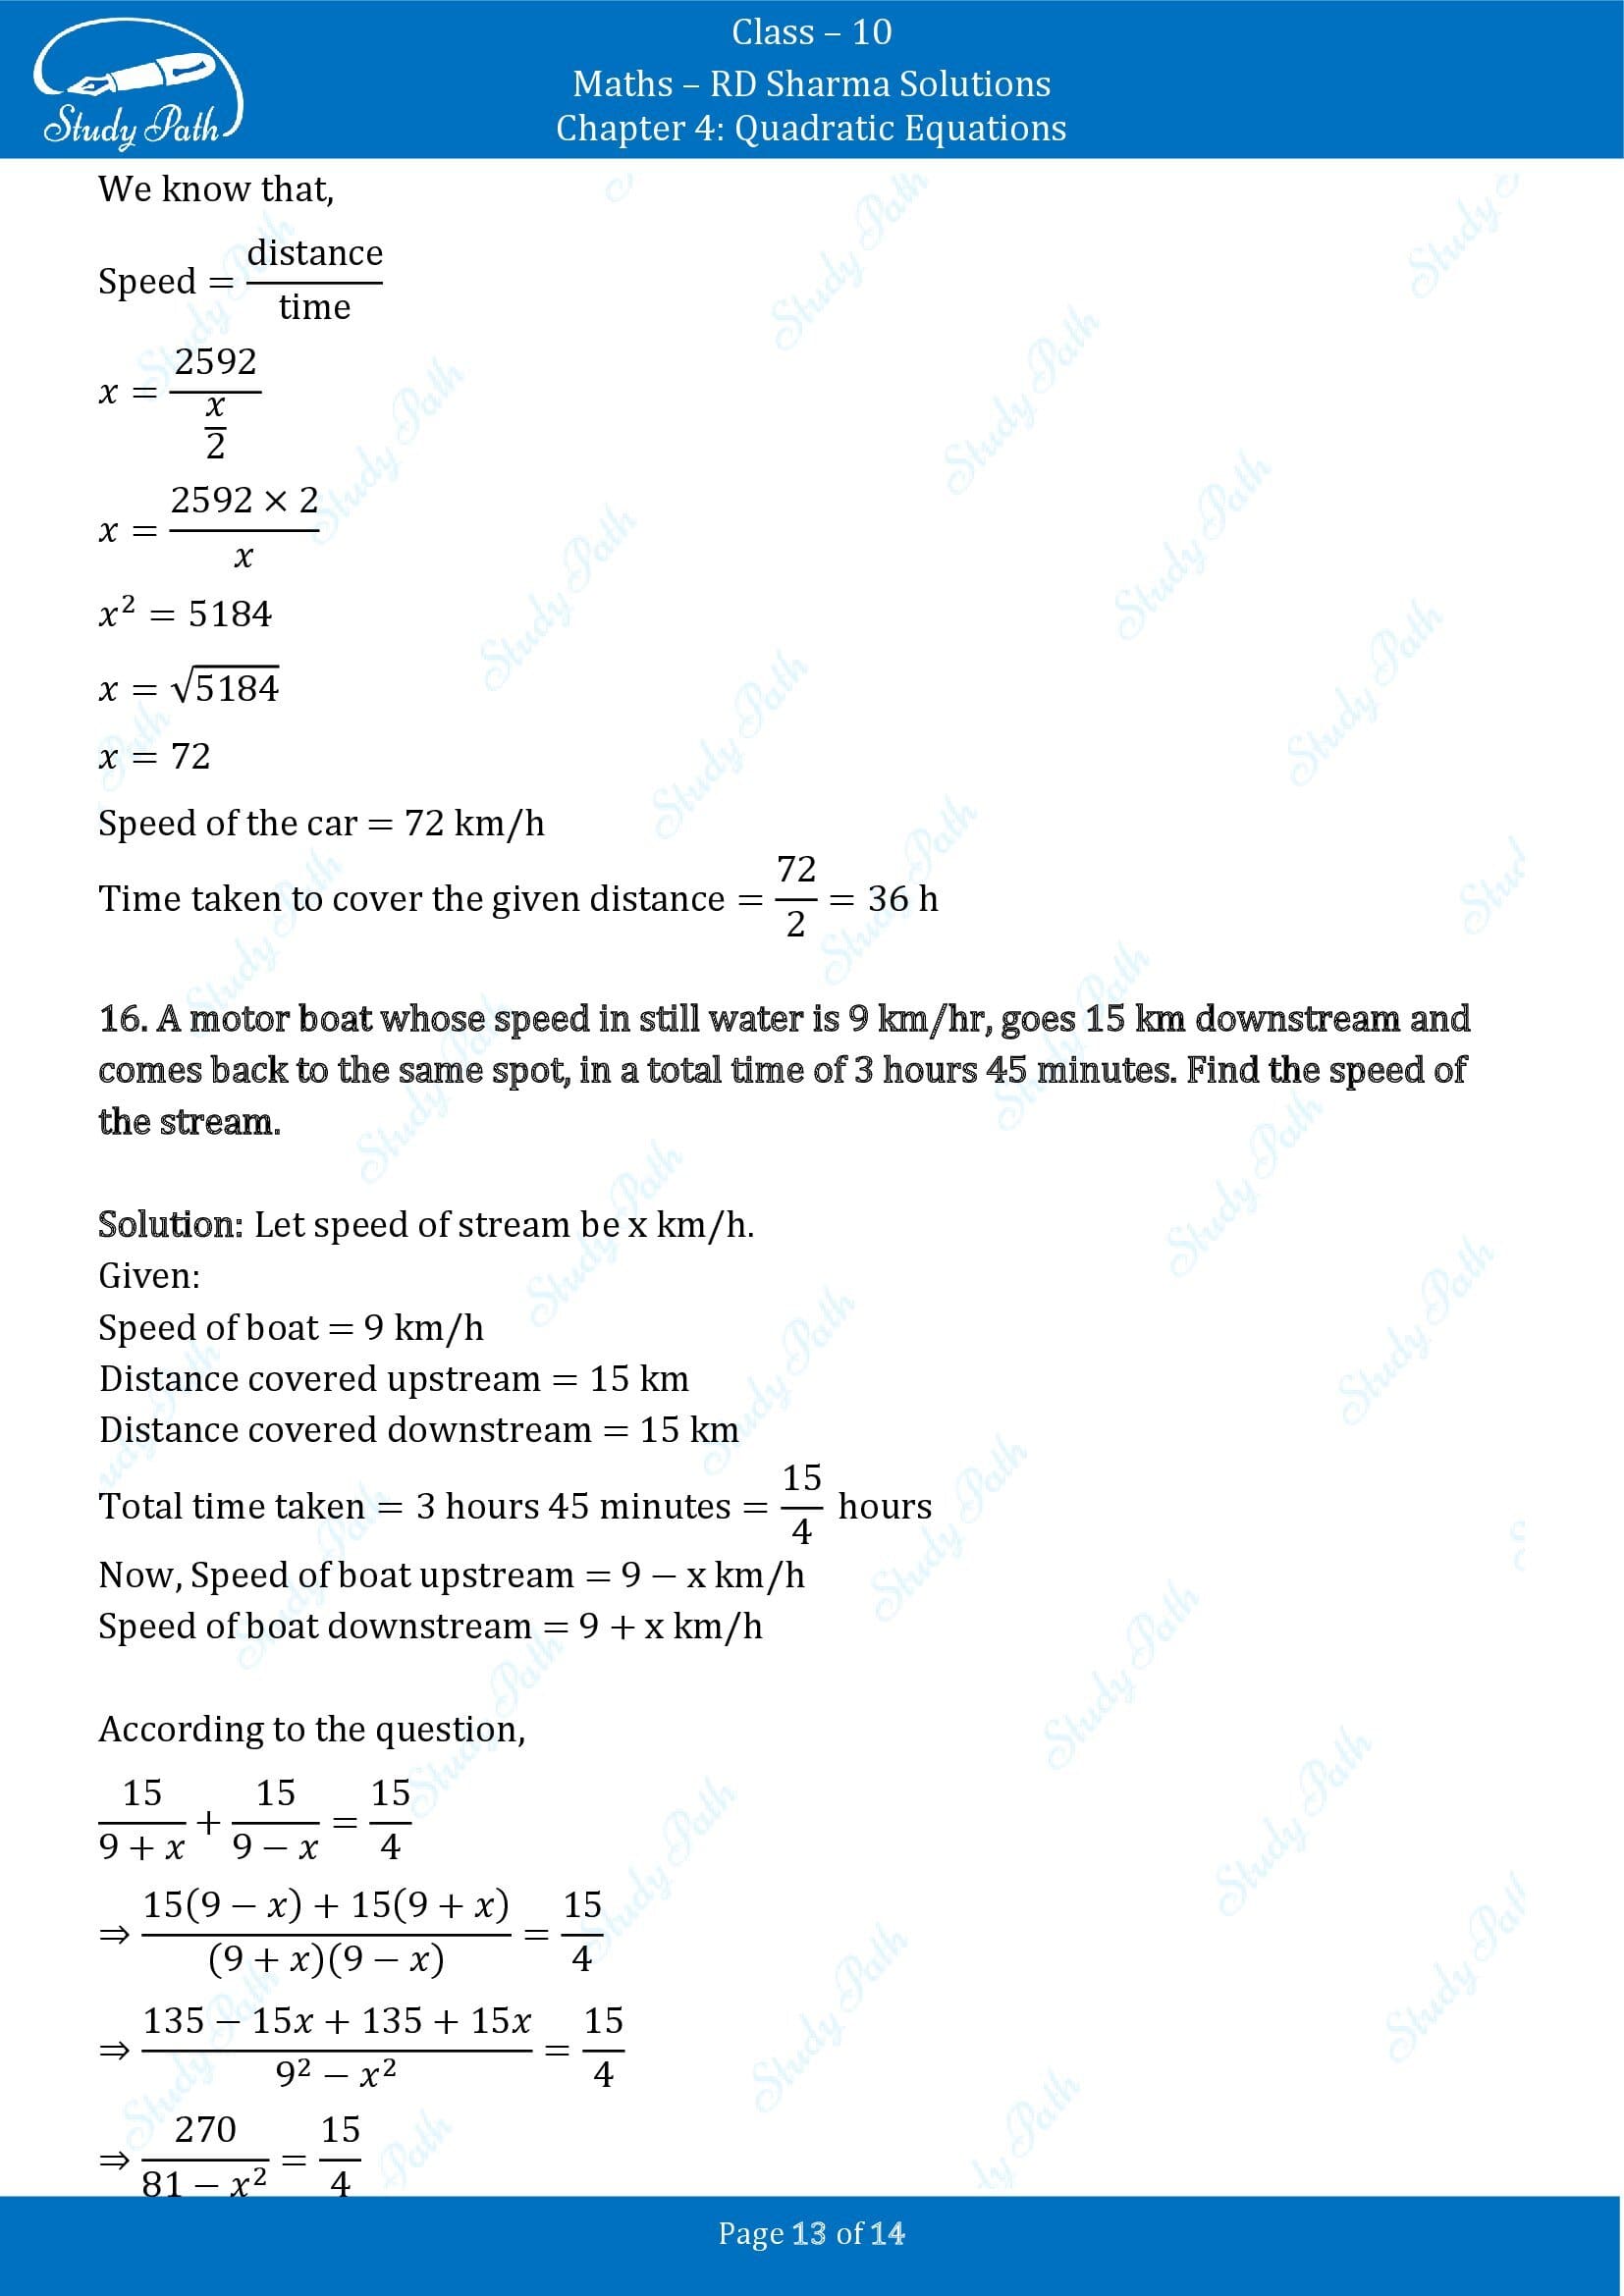 RD Sharma Solutions Class 10 Chapter 4 Quadratic Equations Exercise 4.8 00013